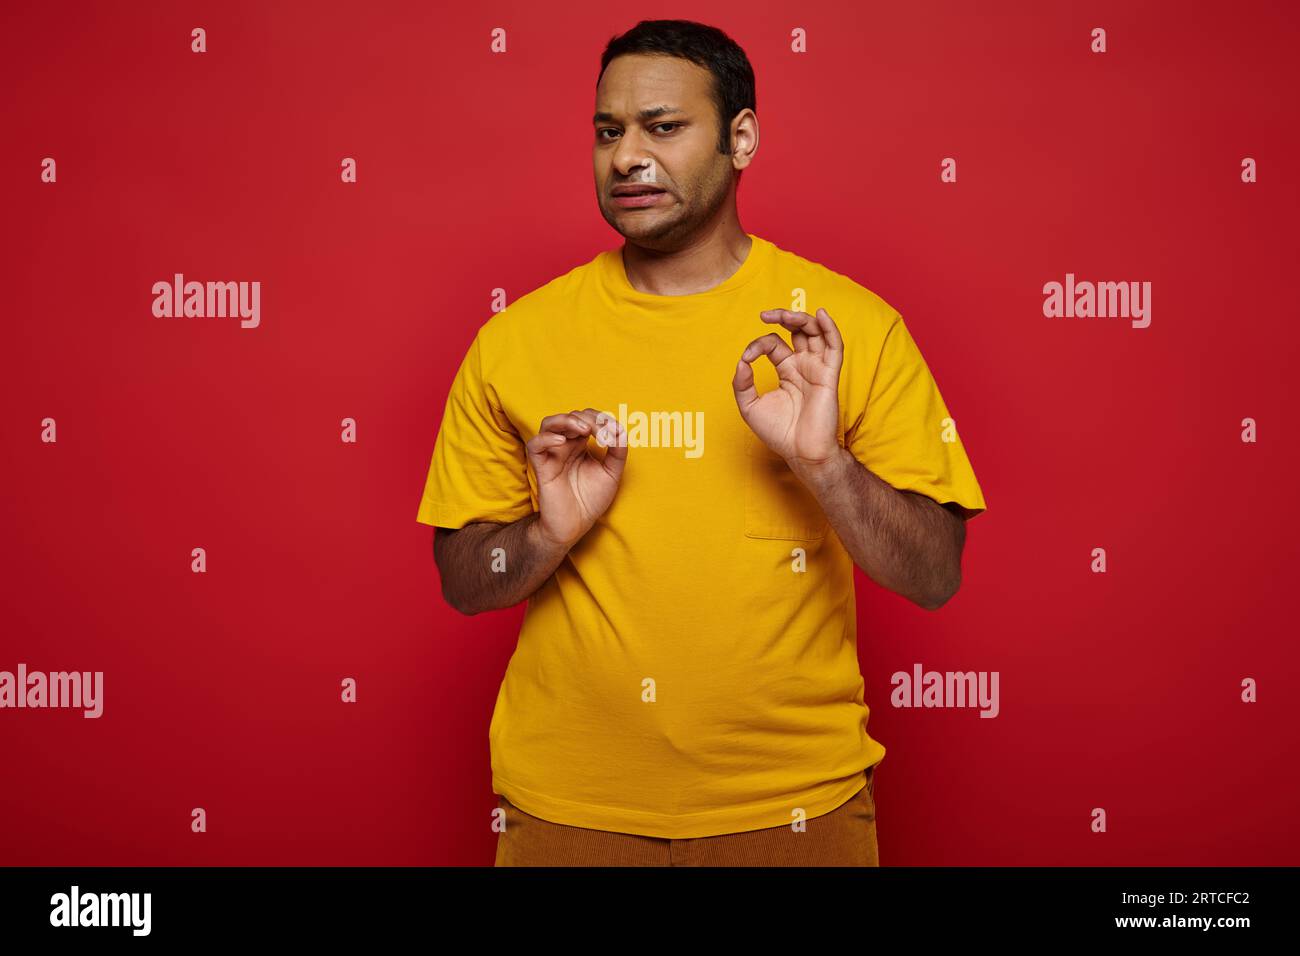 emotional indian man in bright casual clothes making disgusted expression on red background Stock Photo